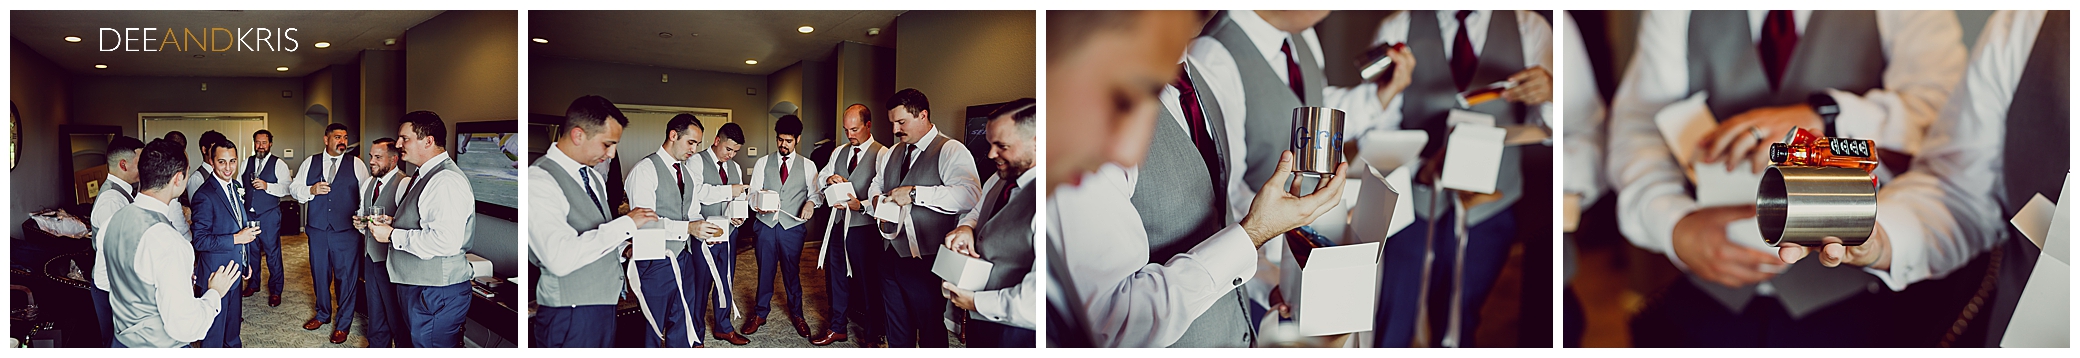 Groom gives gifts to his groomsmen gifts before his wedding. Groomsmen wearing blue pants and grey vest